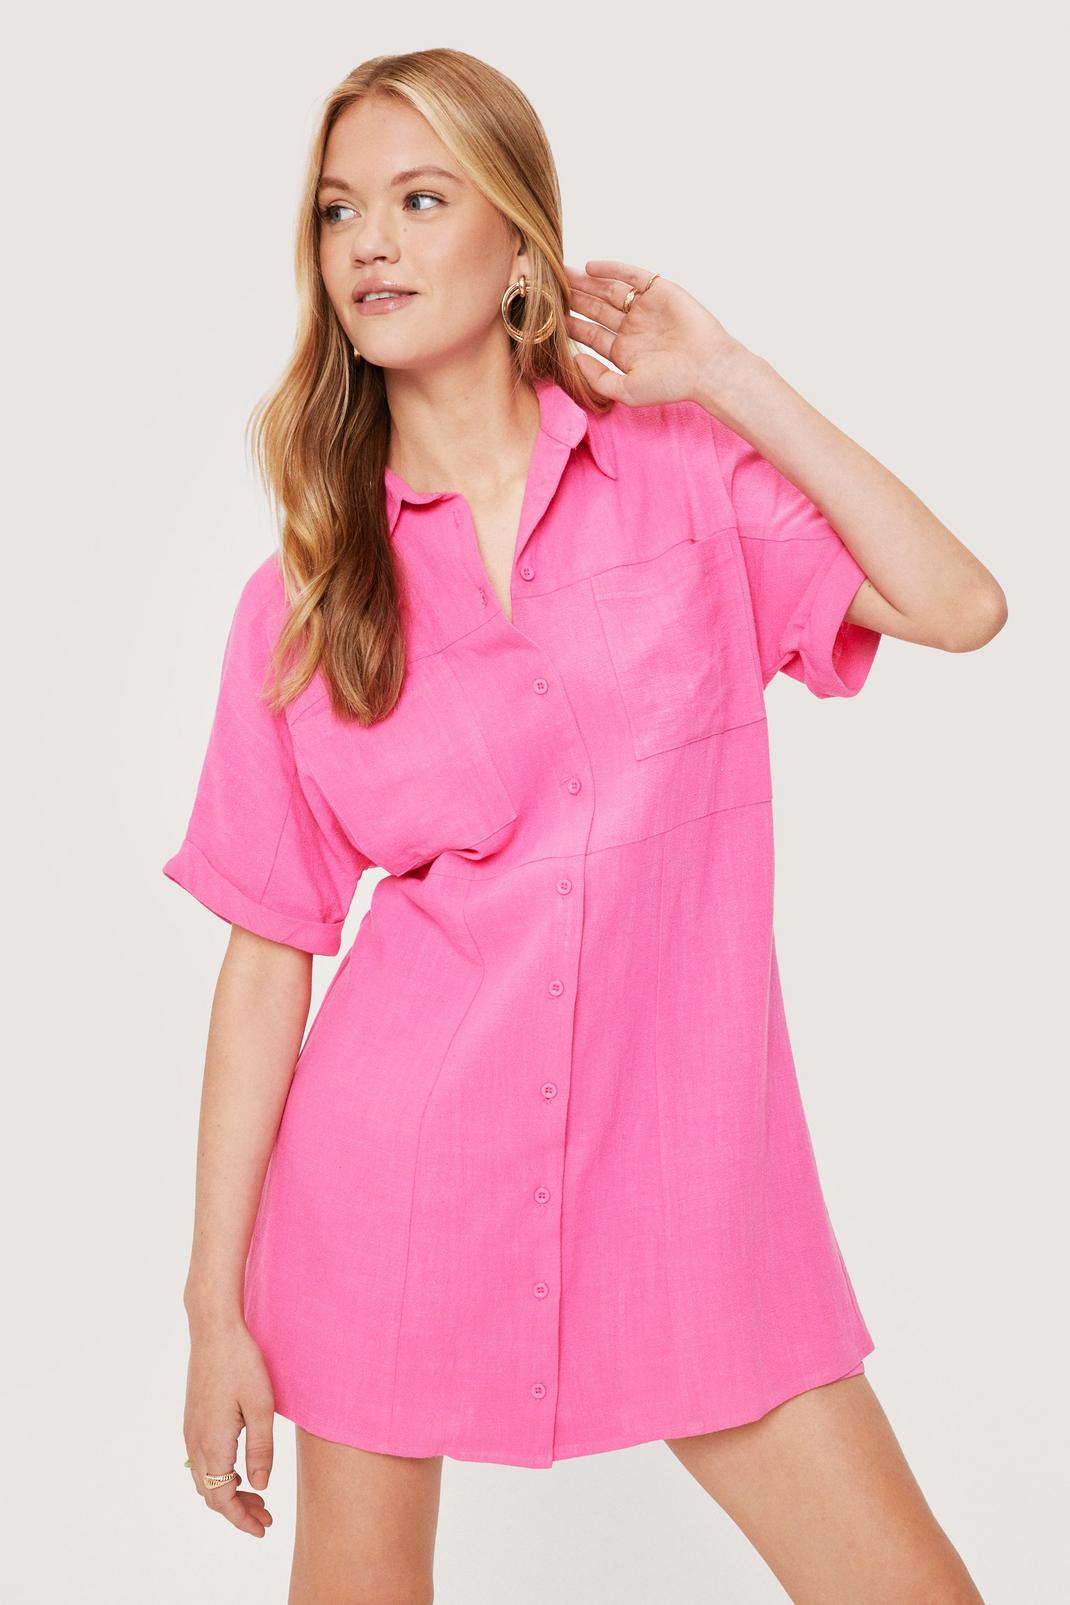 Robe chemise effet lin à manches courtes, Hot pink image number 1